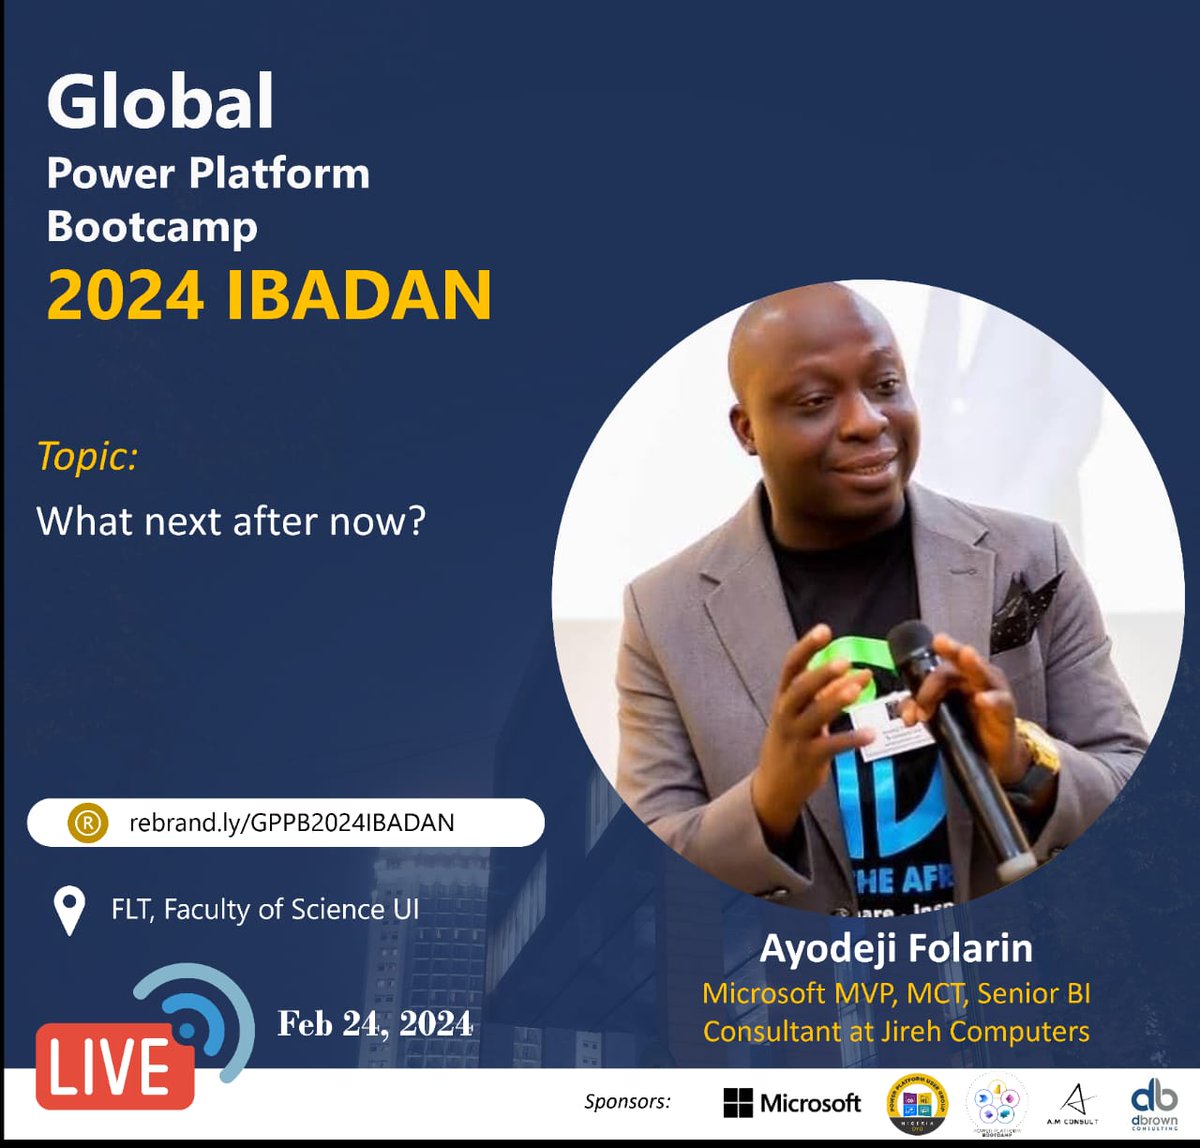 Asking '#WhatNextAfterNow?' Join us at #GPPBootcamp2024Ibadan to find answers with @deji_folarin Look beyond the current tech landscape and explore what the future holds🌟 #TechFuture Register here: rebrand.ly/GPPB2024IBADAN #GPPB2024 #GPPB2024IBADAN